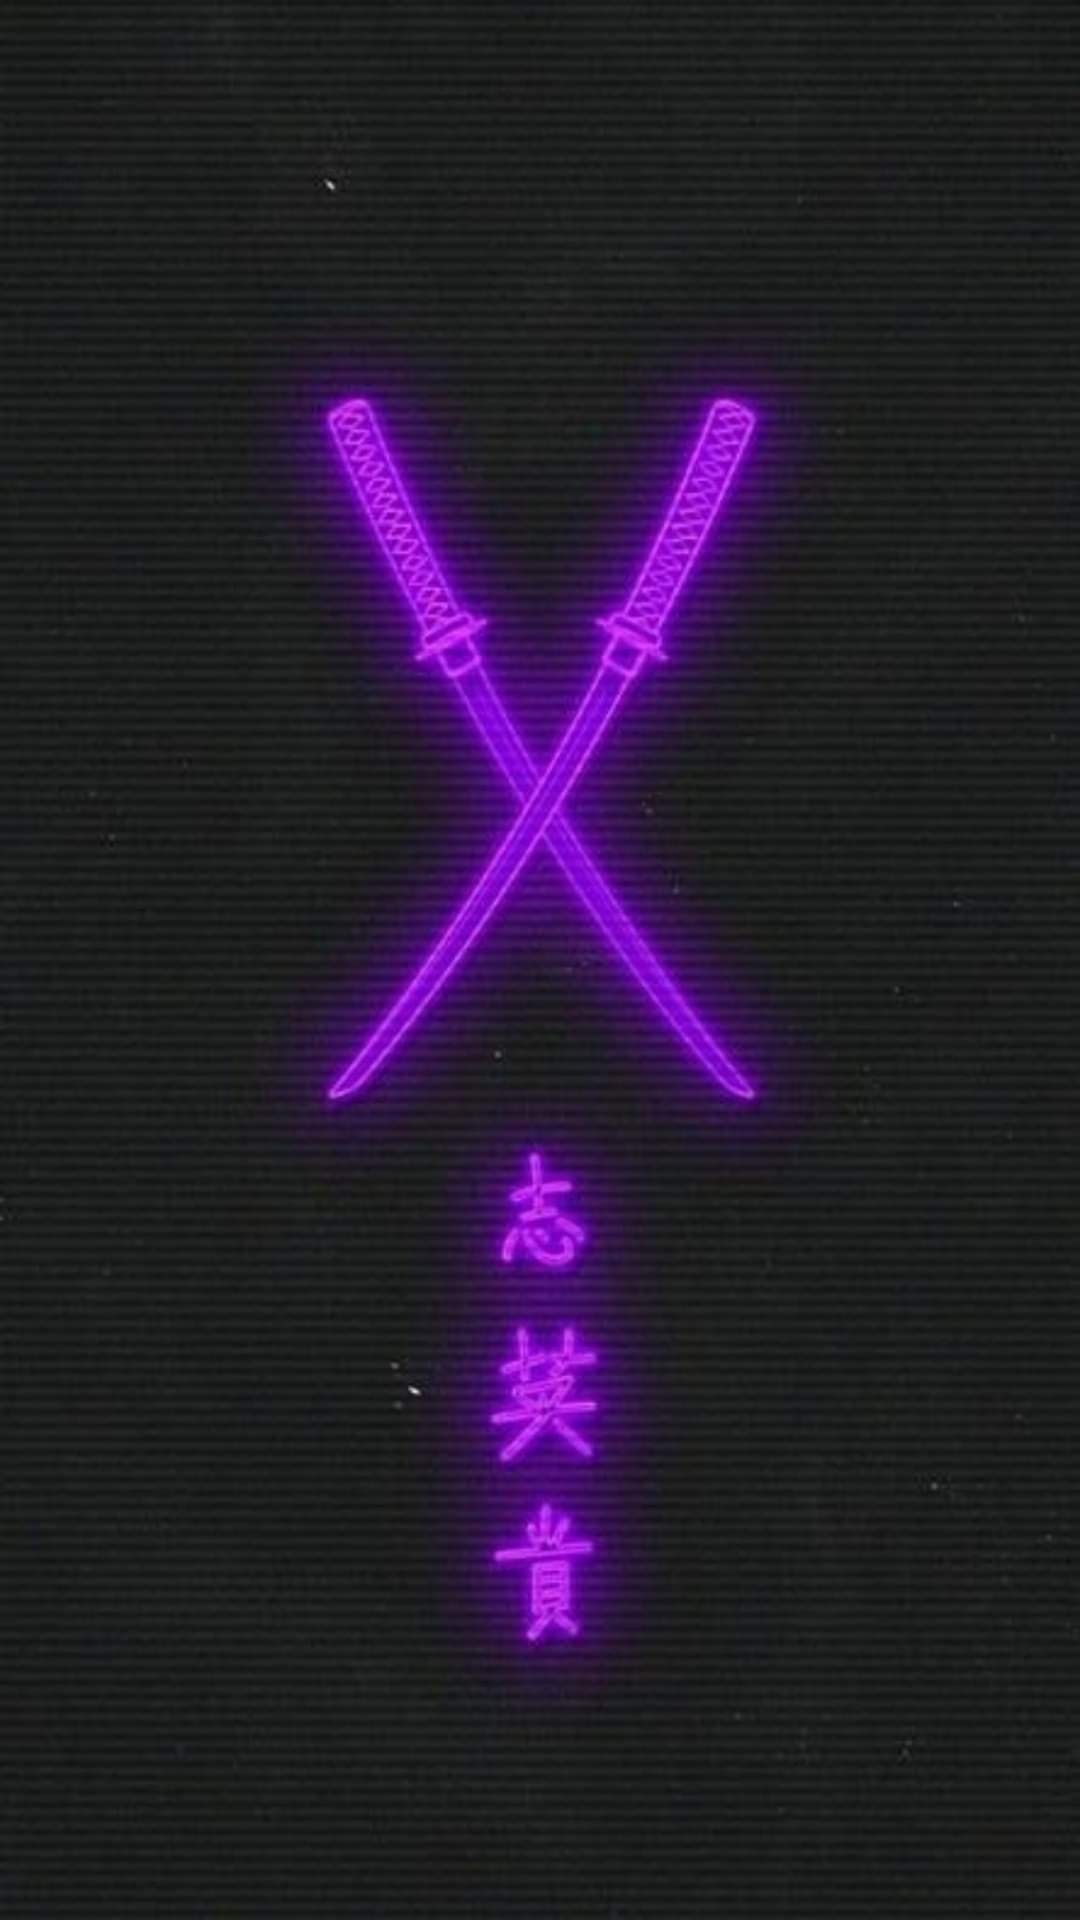 Chinese? -> English I have this as my wallpaper and I wanna know what it says